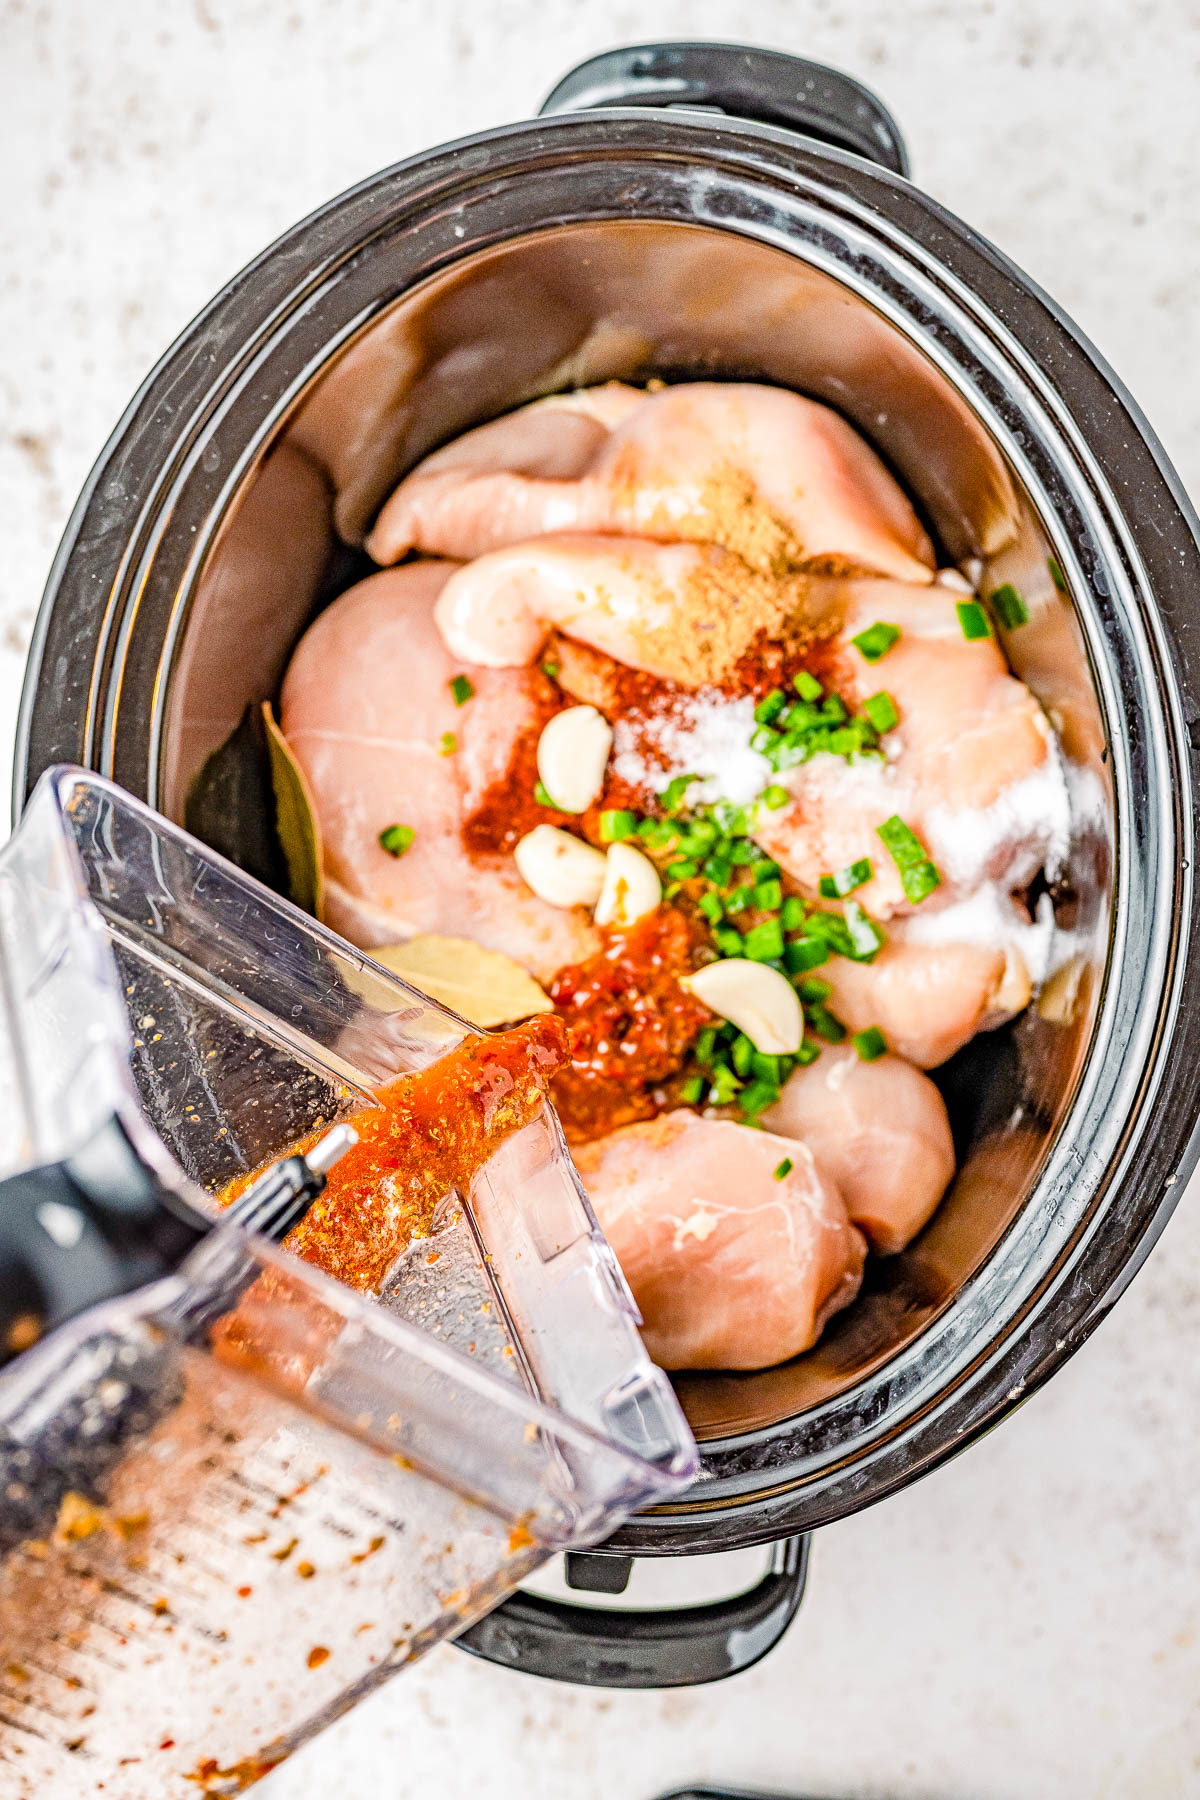 Slow Cooker Chicken Carnitas - These EASY and flavorful chicken carnitas are seasoned with Mexican spices, citrus juices, chipotle peppers in adobo and slow-cooked to PERFECTION! A quick trip under the broiler ensures those traditional crispy bits and then it's ready to use in tacos, burritos, salads, or other Mexican-inspired dishes for a simple but family FAVORITE weeknight dinner! 